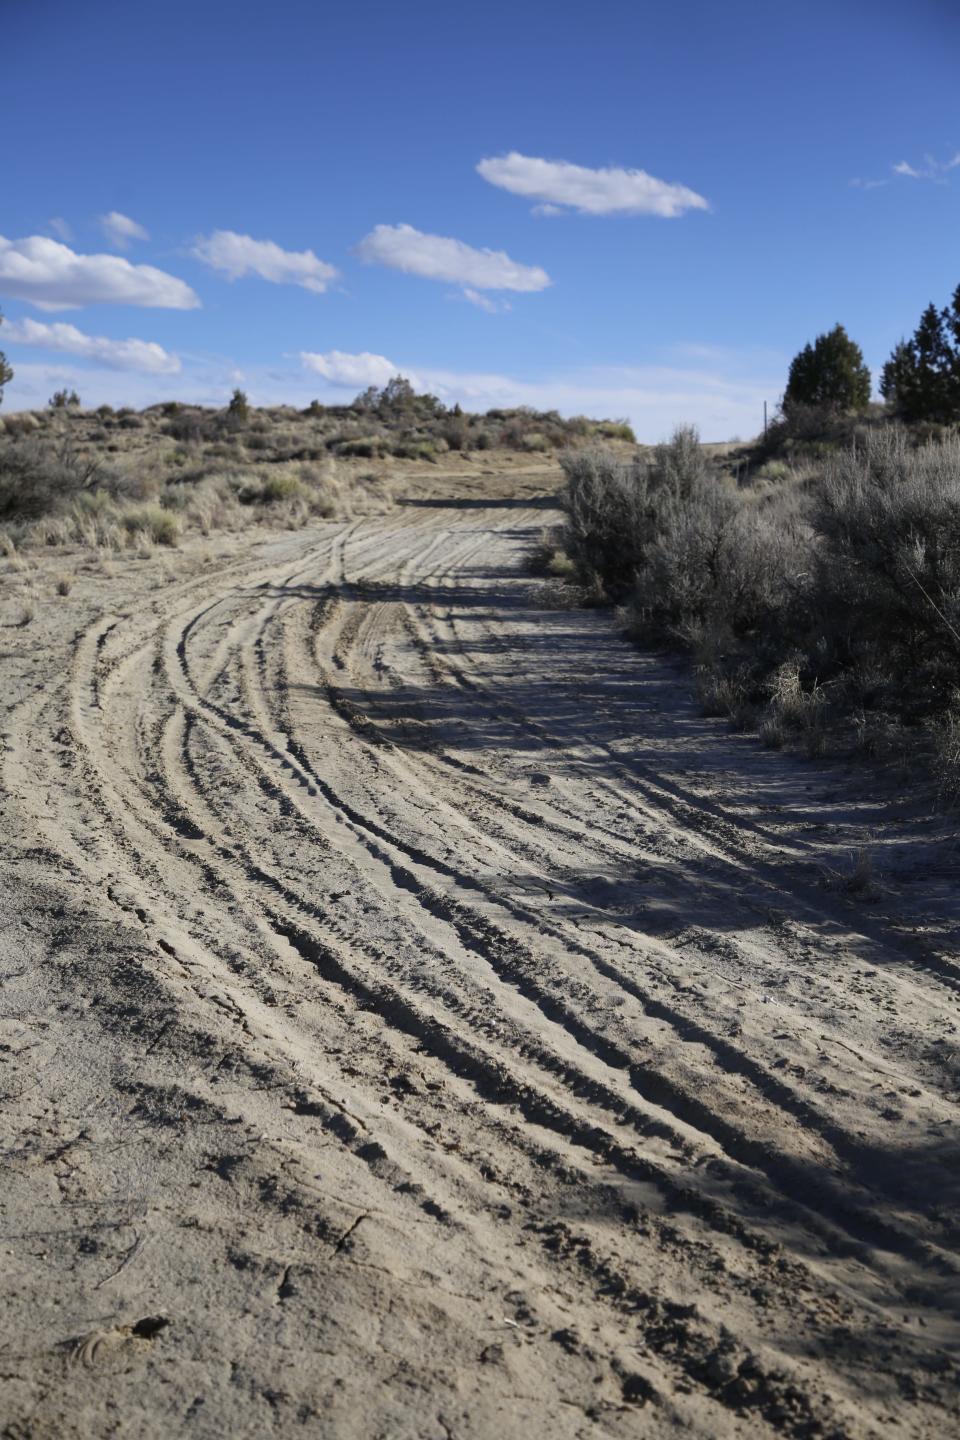 San Juan County is home to thousands of miles of unpaved oil as gas roads on government lands that will be catalogued for outdoors enthusiasts in a new gravel biking guide.